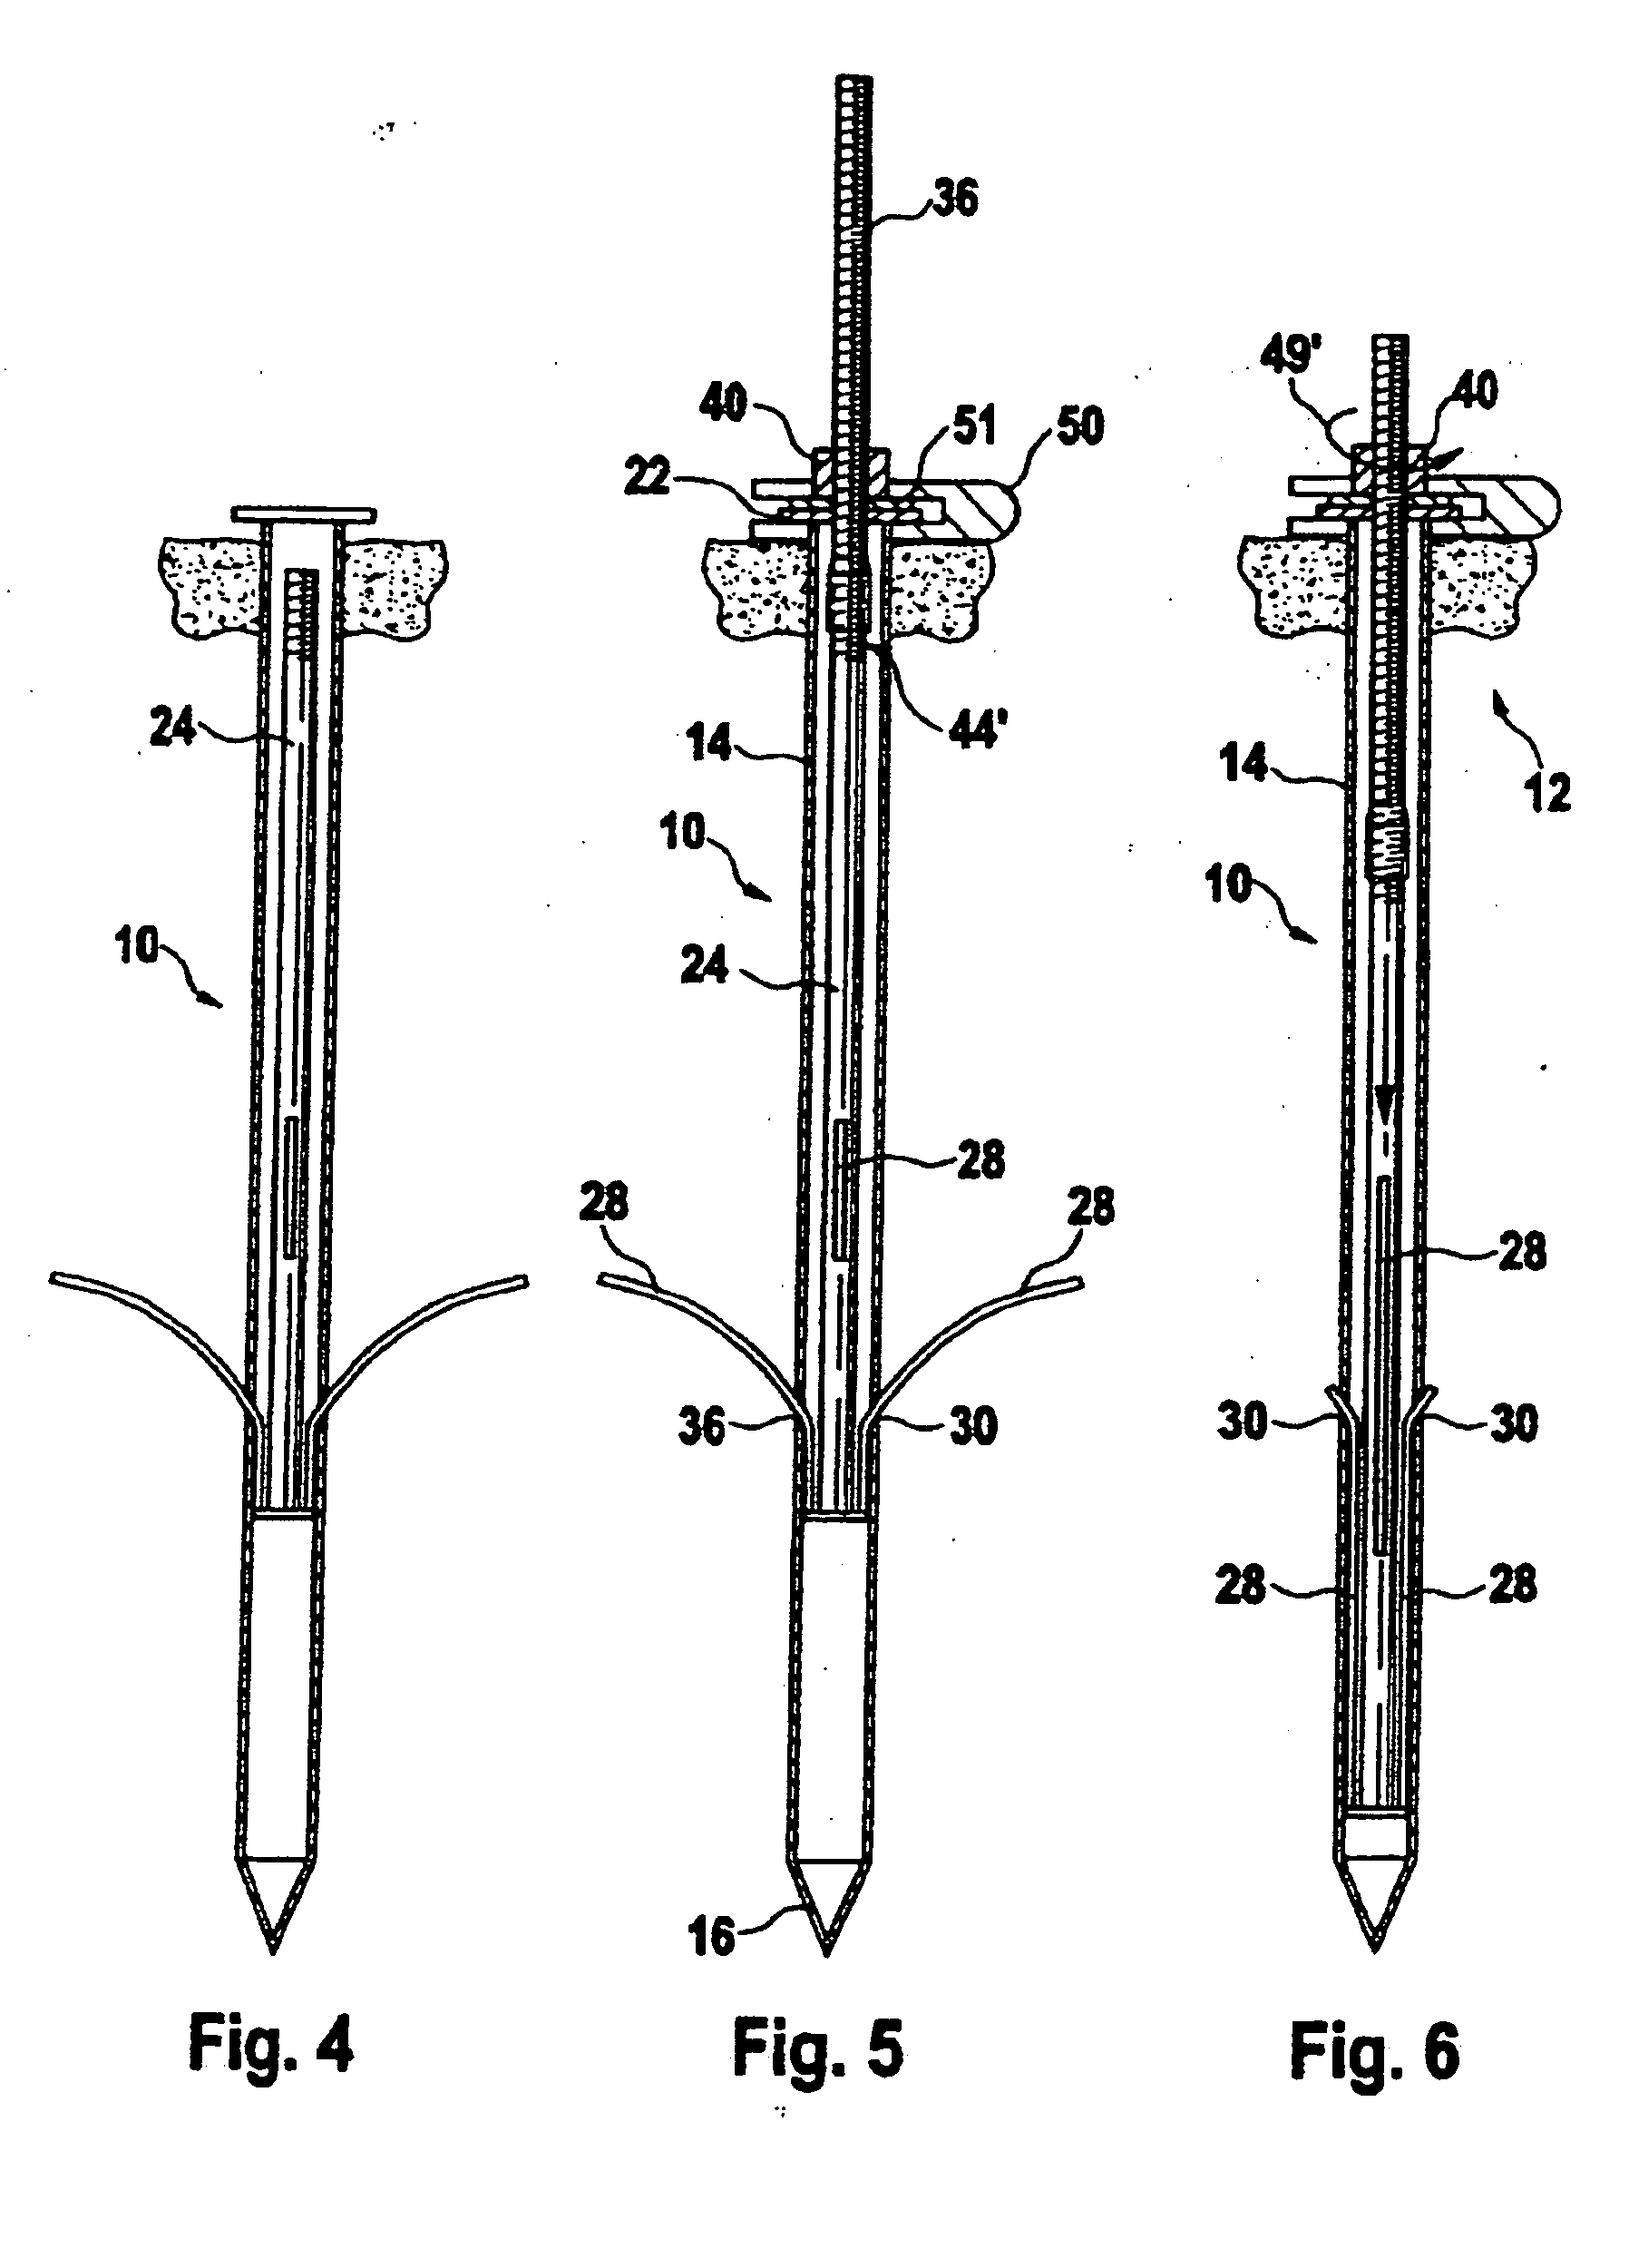 System for fixing an object in the ground by means of a peg